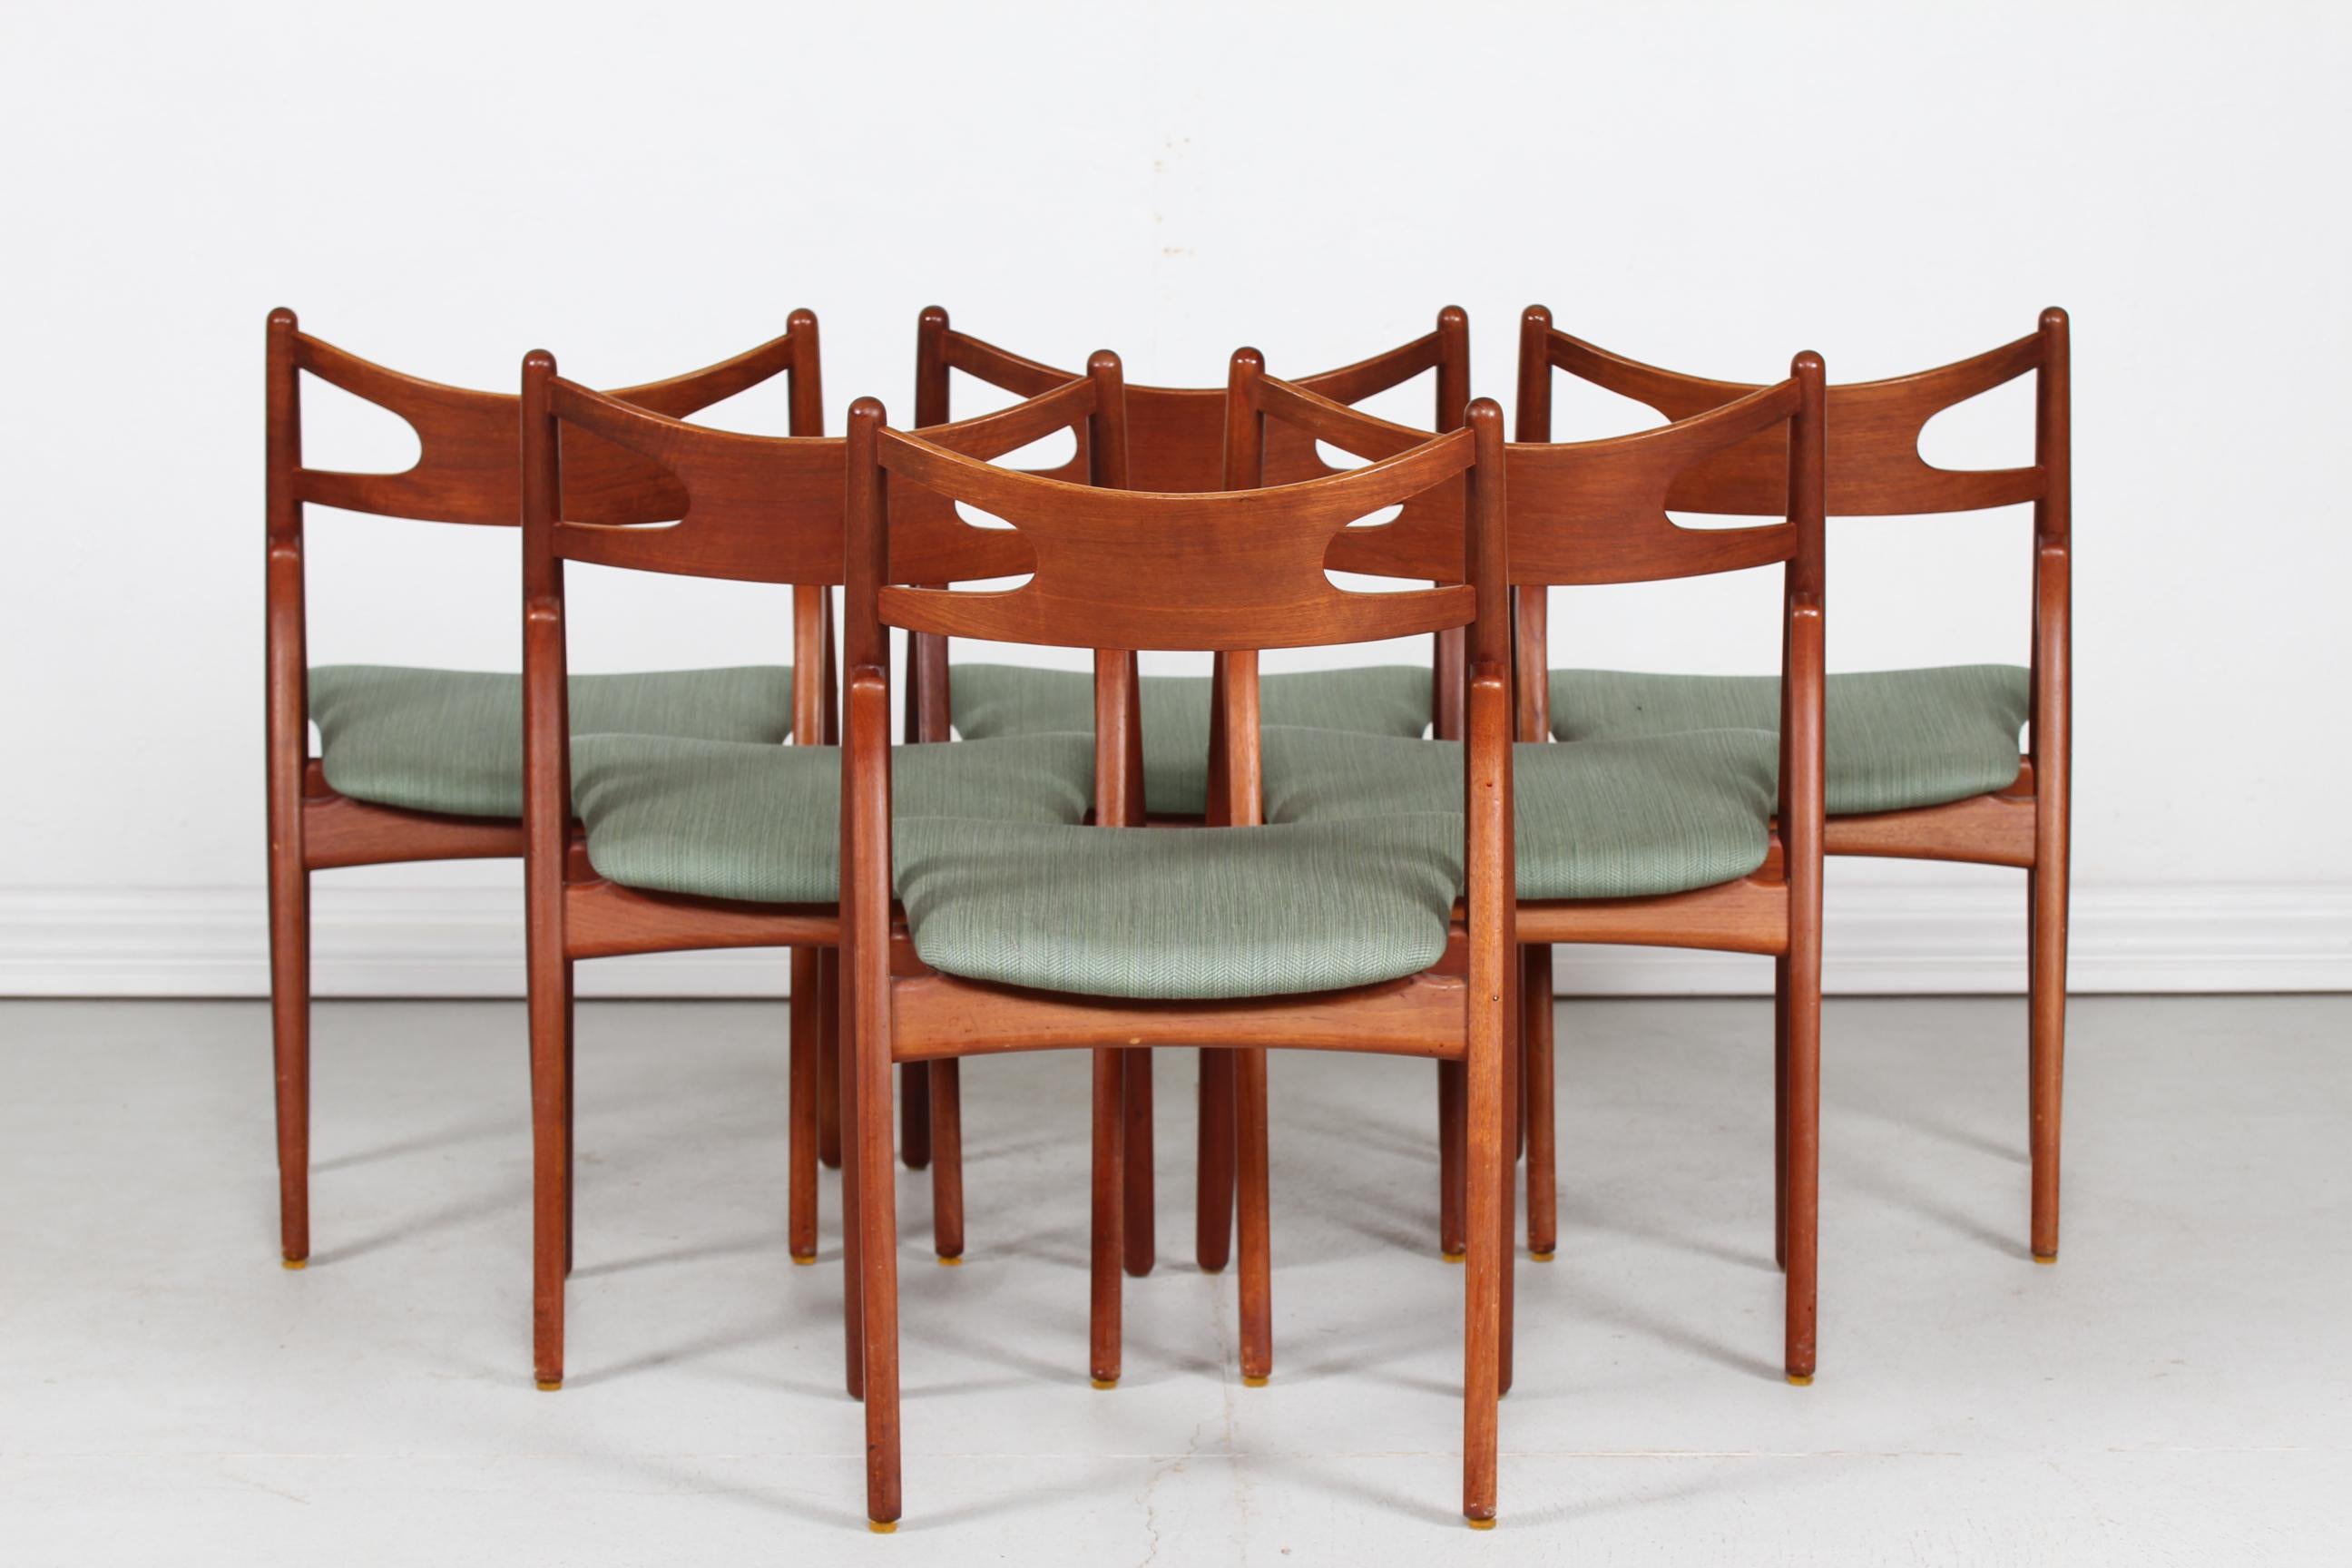 A set of six dining room chairs model no. CH-29 designed in 1952 by the Danish architect Hans J. Wegner and manufactured by Carl Hansen & Sons, Odense, Denmark the following years.
The model CH-29 is also known as the sawbuck chair because of the